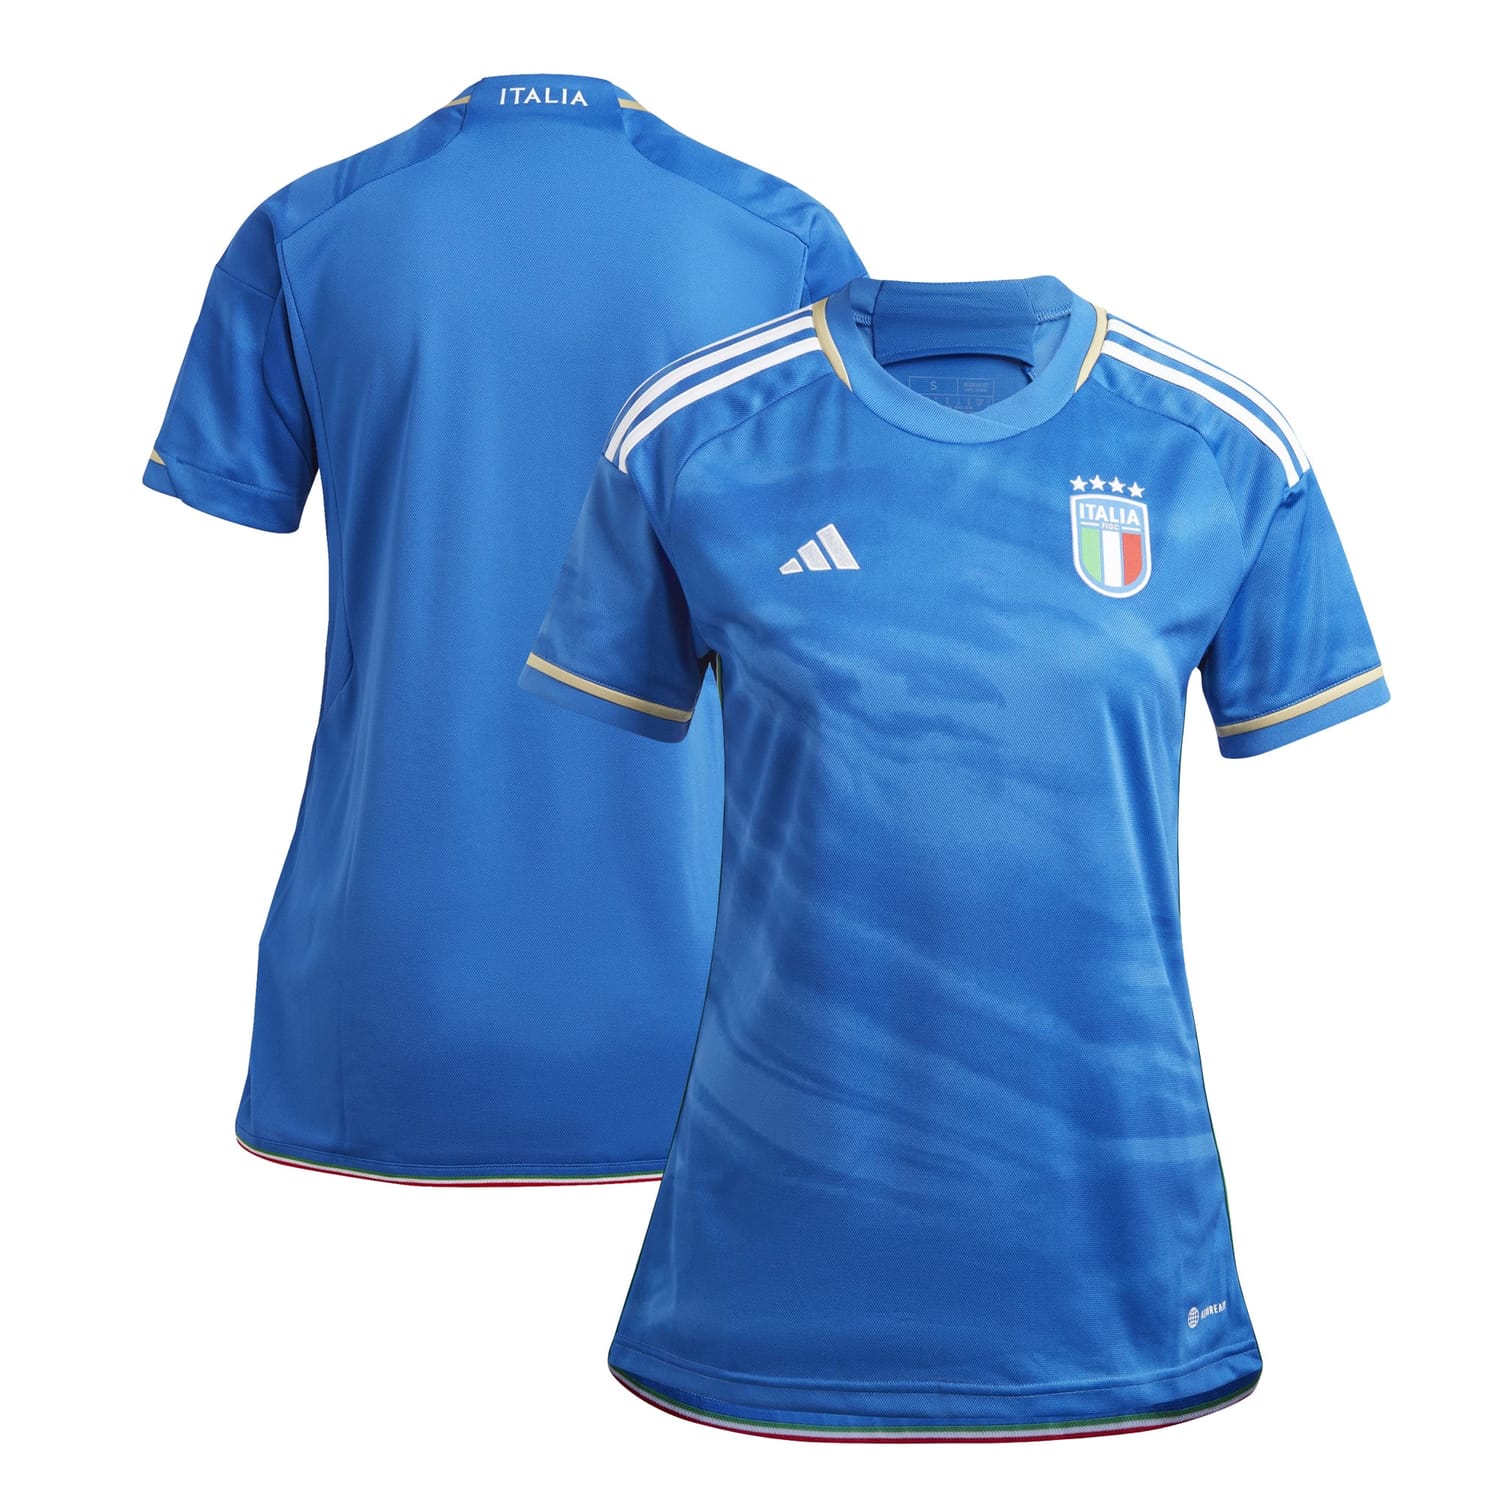 Italy National Team Home Jersey Shirt for Women